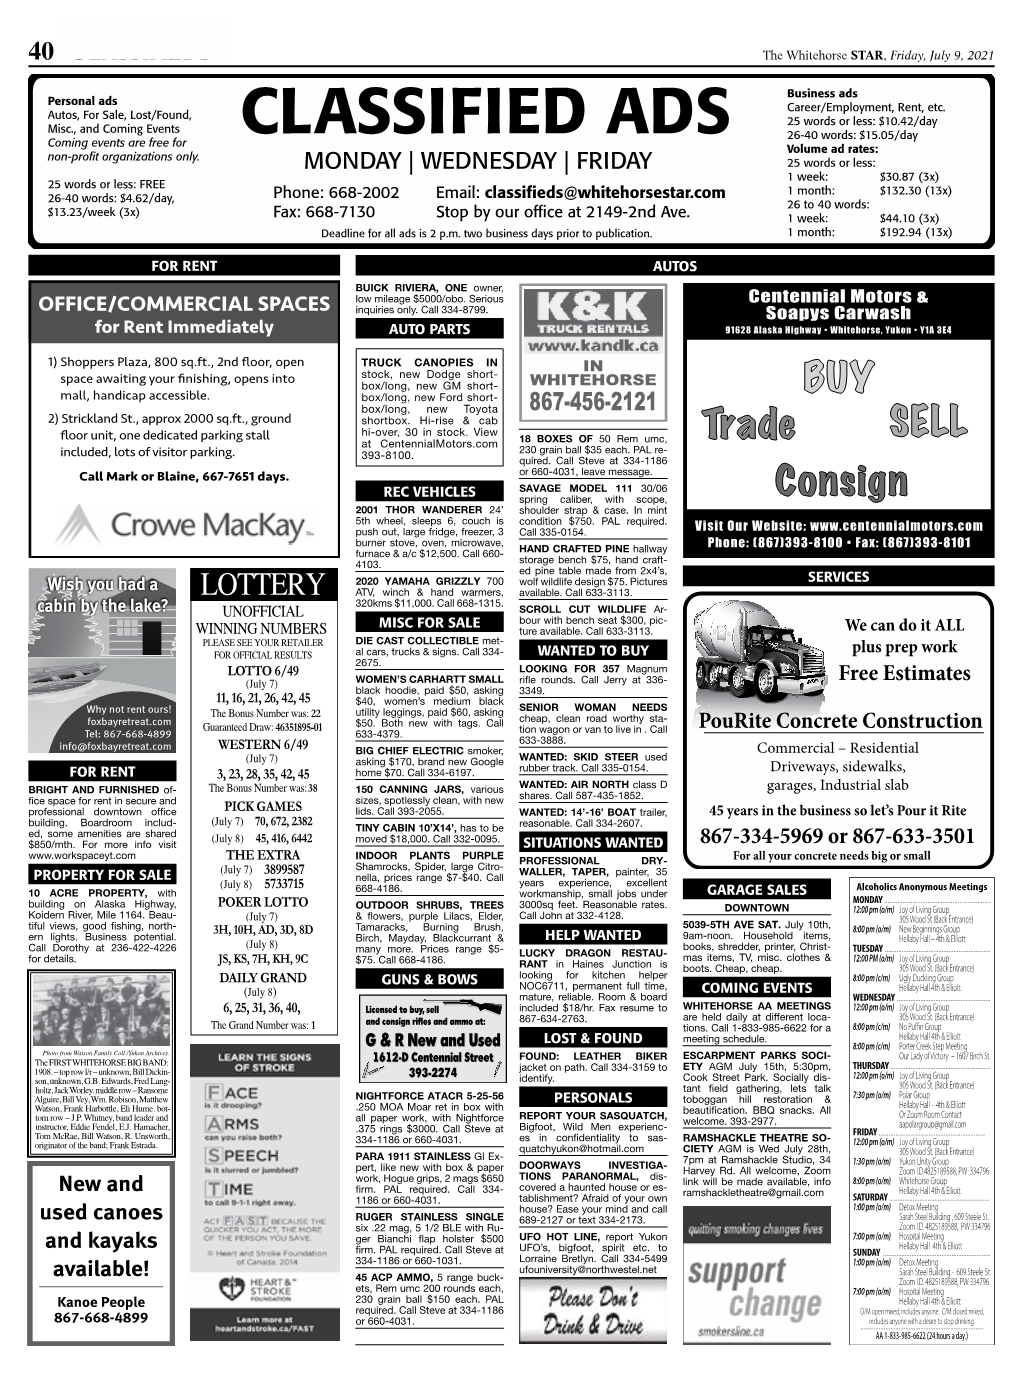 Classifieds the Whitehorse STAR, Friday, July 9, 2021